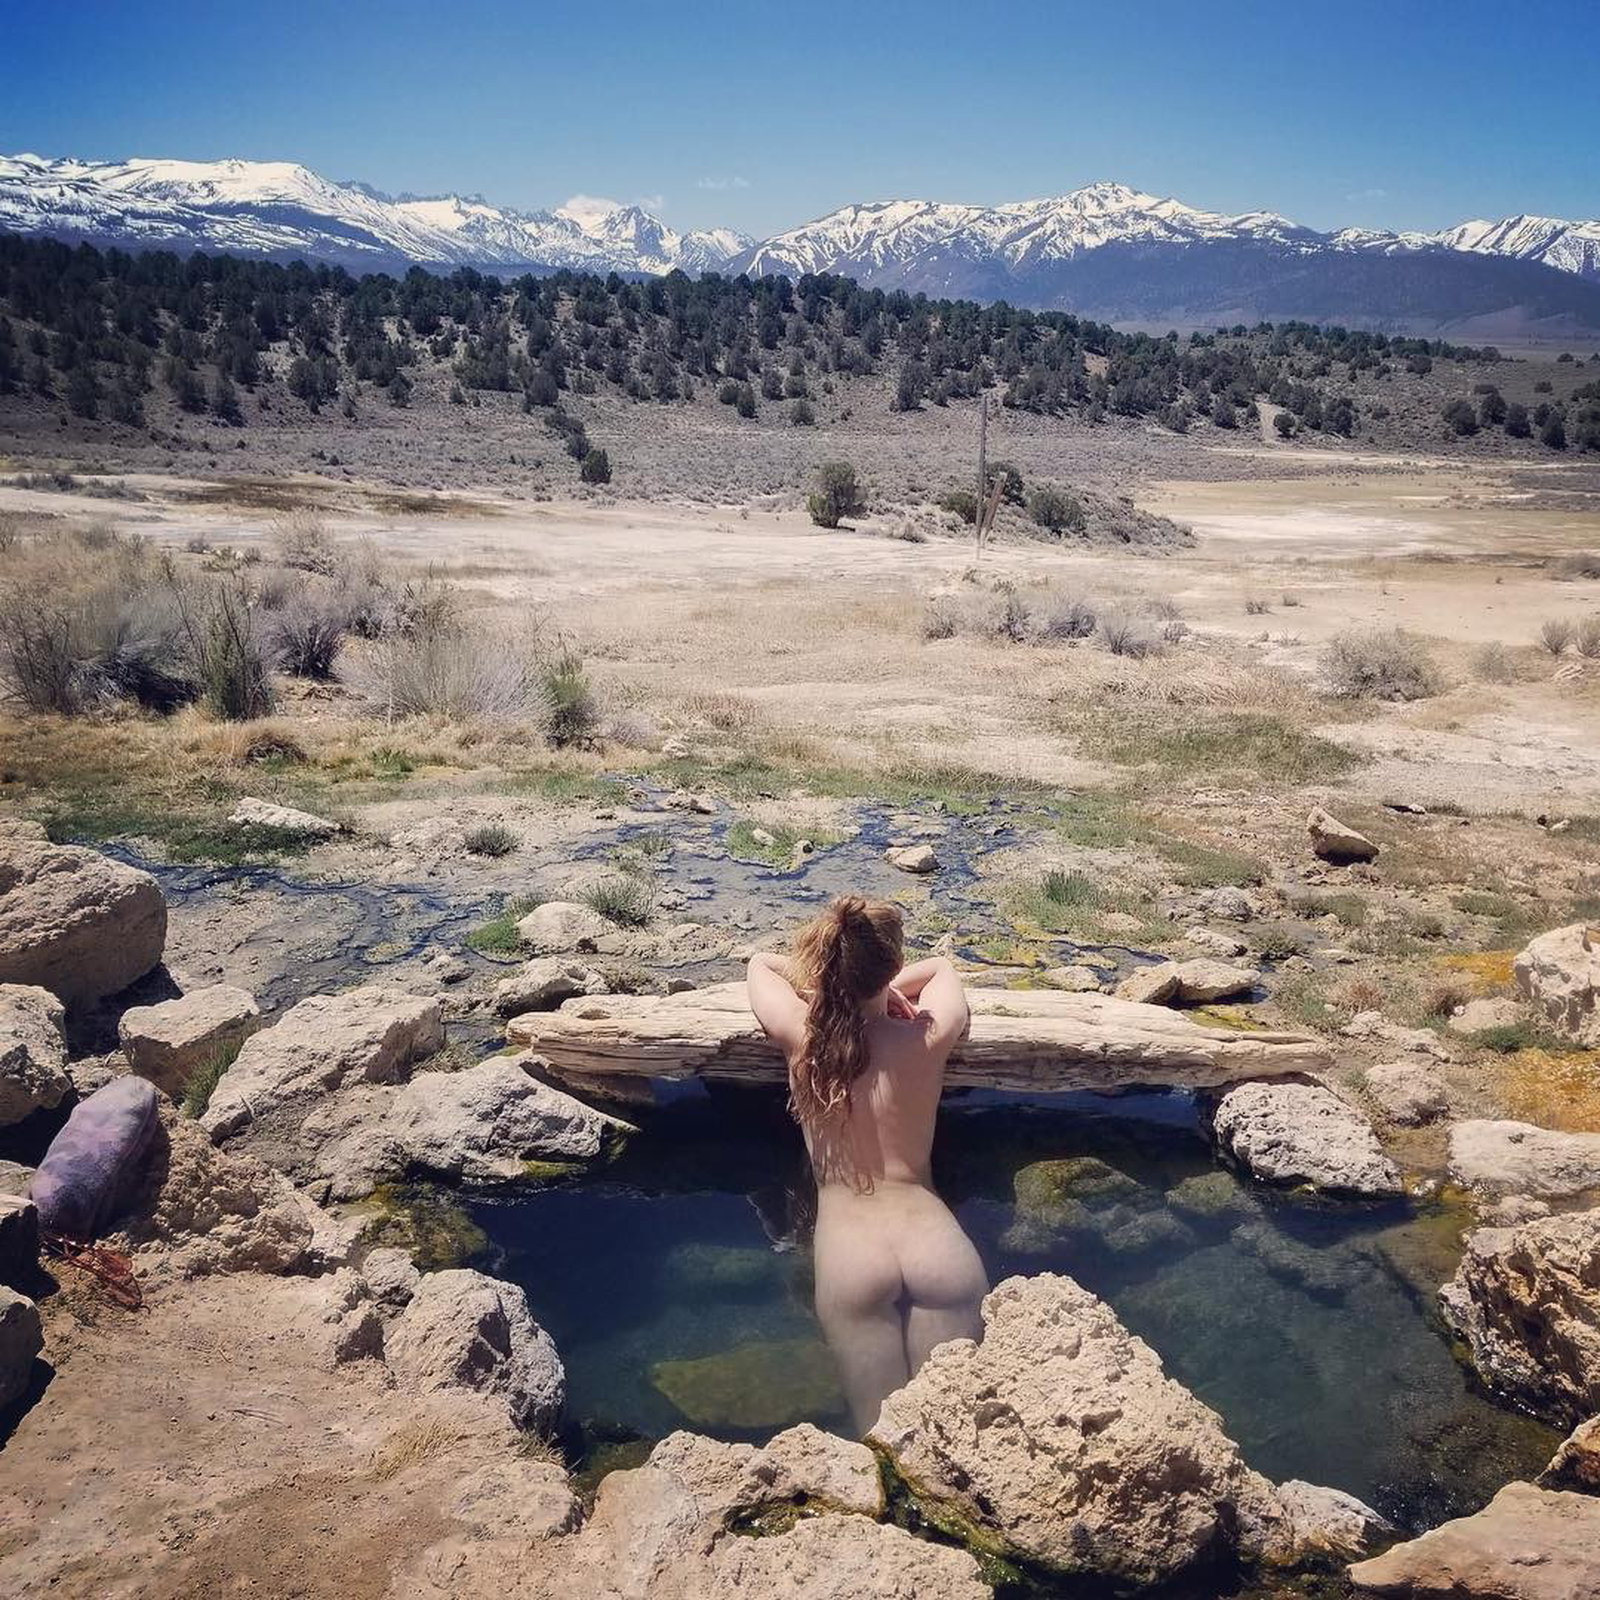 Watch the Photo by rysvdcafeq with the username @rysvdcafeq, posted on June 1, 2018 and the text says 'soakingspirit:
mary.heartemisia
Penthouse for the wild ones. .....#selfcare #hotsprings #bliss#naturalhotspring #californiaadventure#sagebrush #spa'